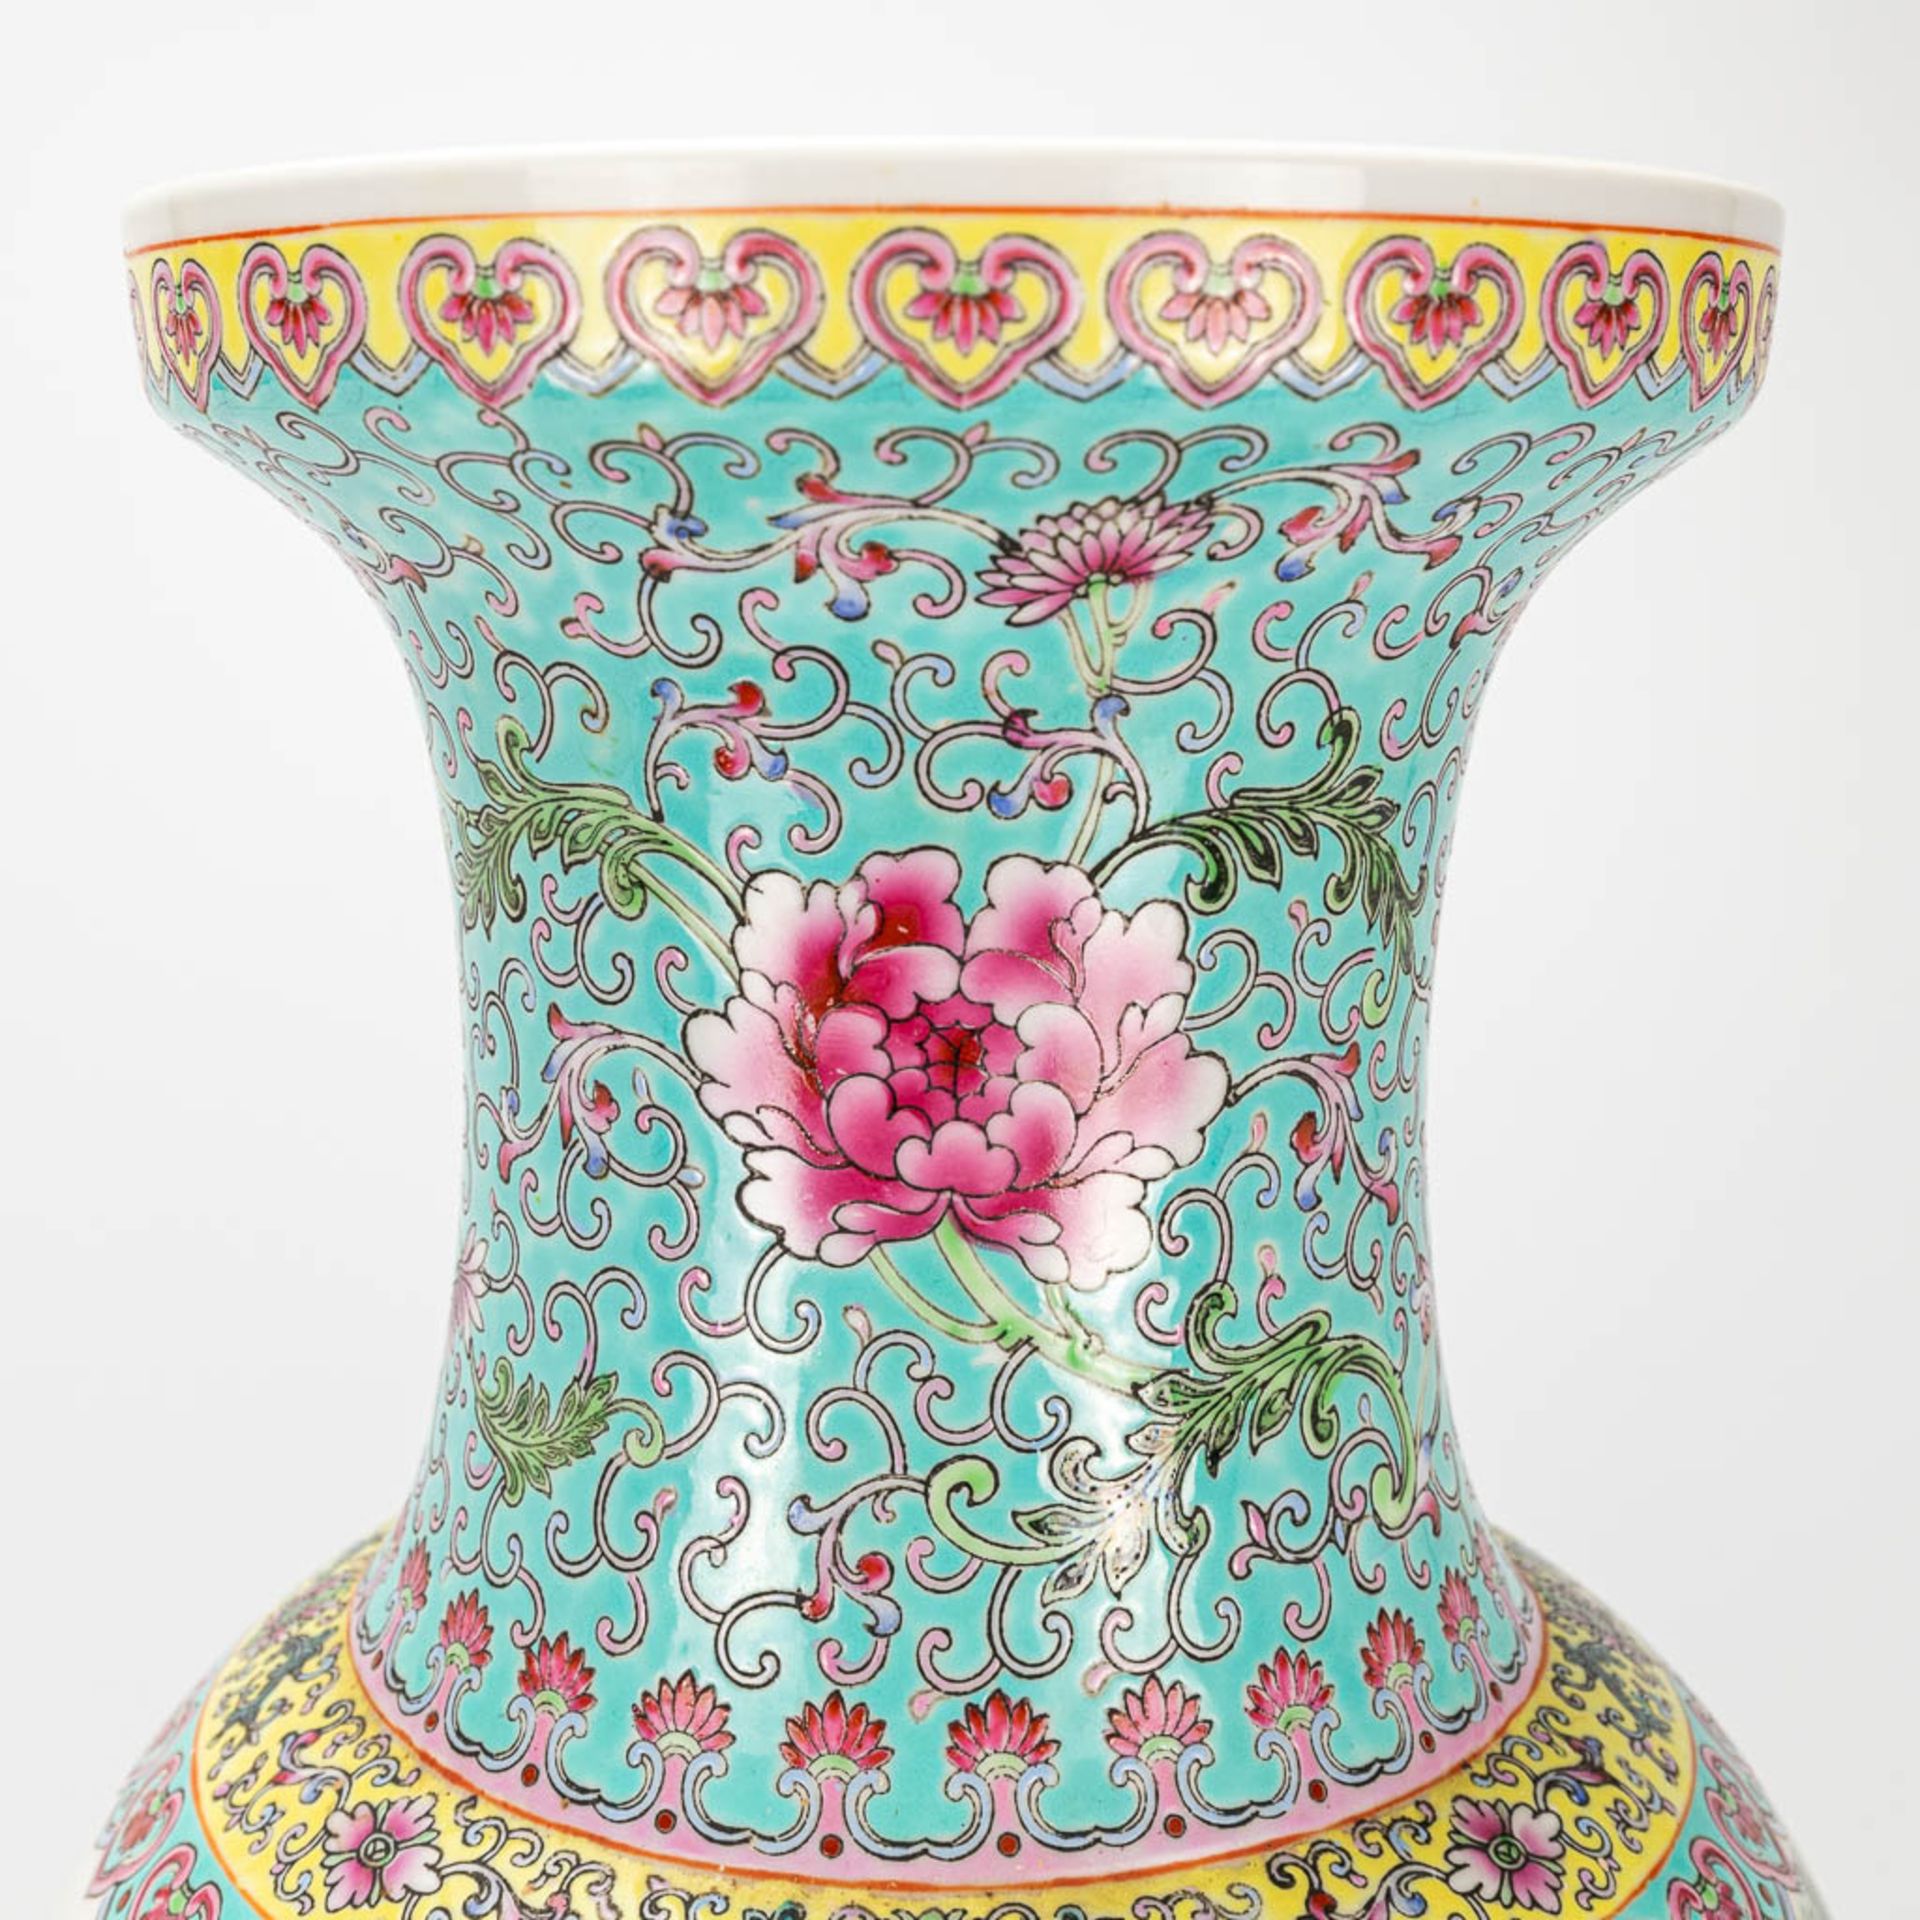 A vase made of Chinese porcelain and decorated with peacocks - Image 10 of 16